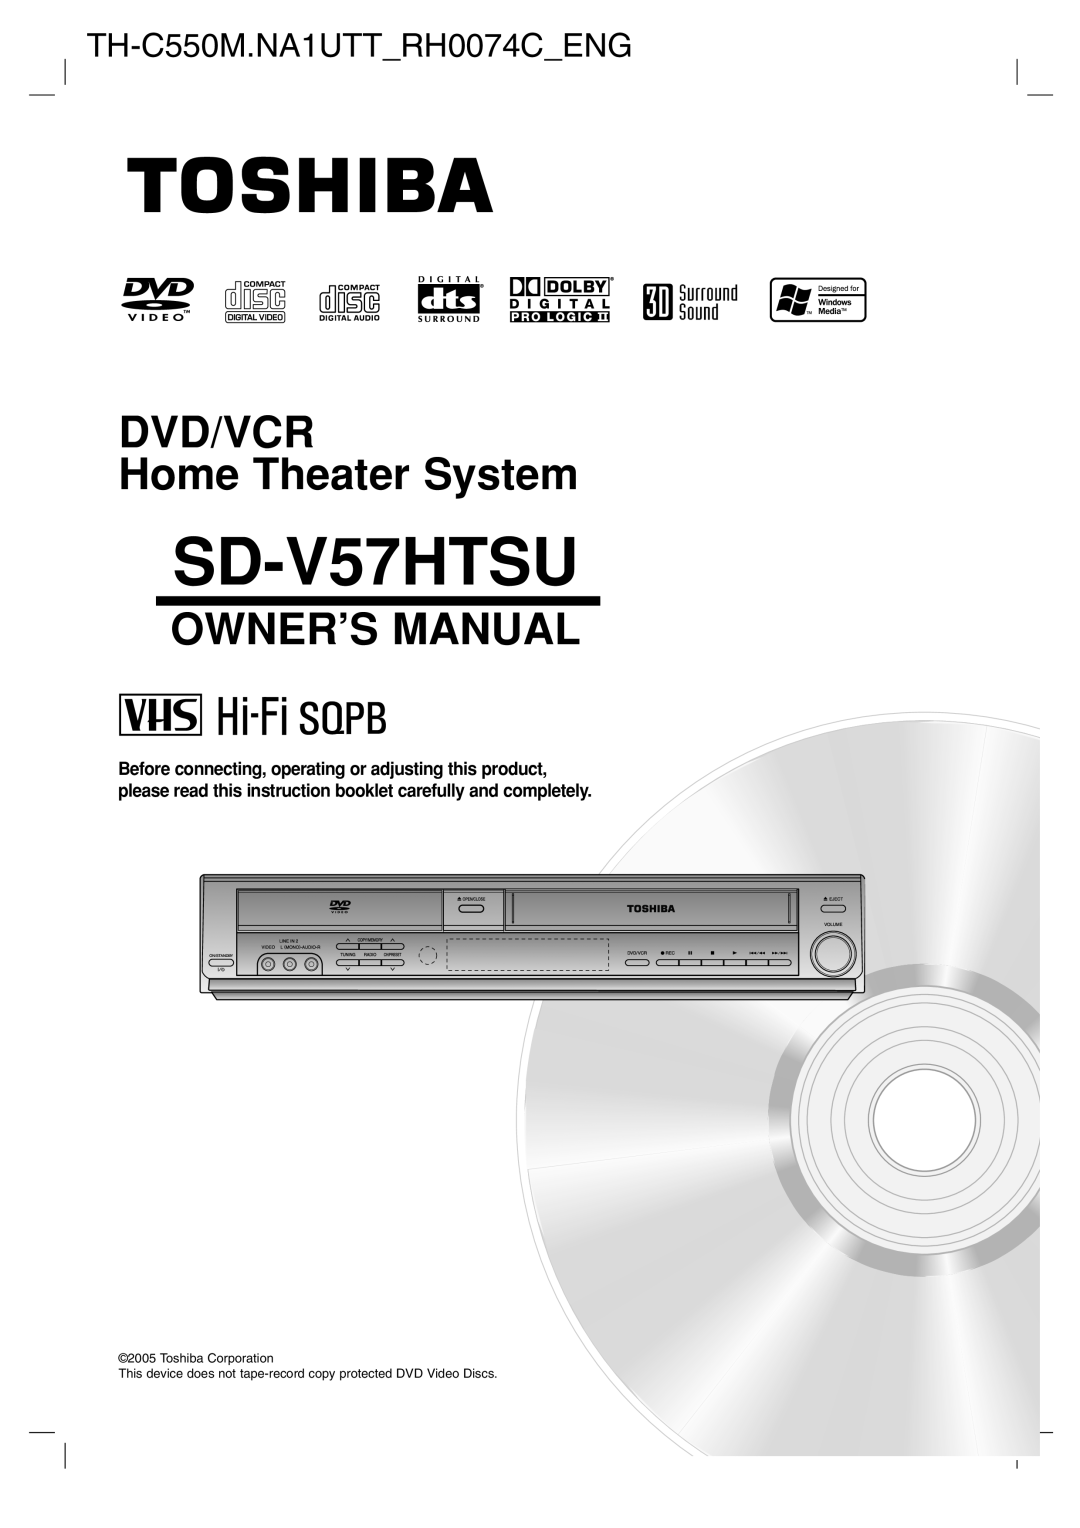 Toshiba SD-V57HTSU owner manual DVD/VCR Home Theater System, Owner’S Manual, TH-C550M.NA1UTT_RH0074C_ENG 